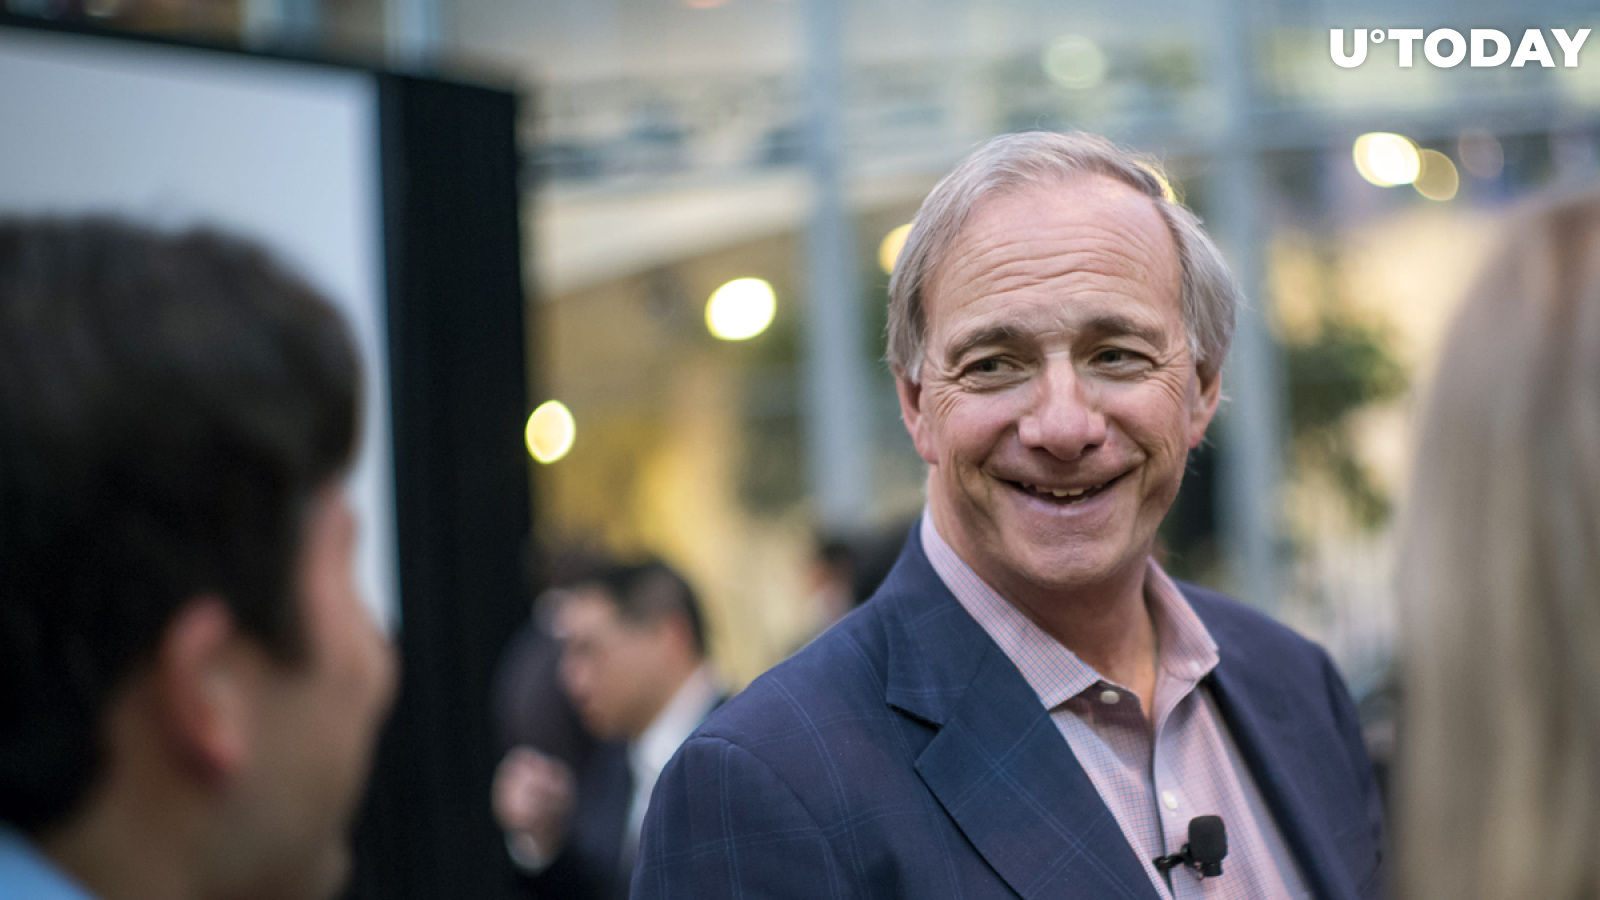 Bitcoin "Very Likely" to Be Outlawed: Ray Dalio